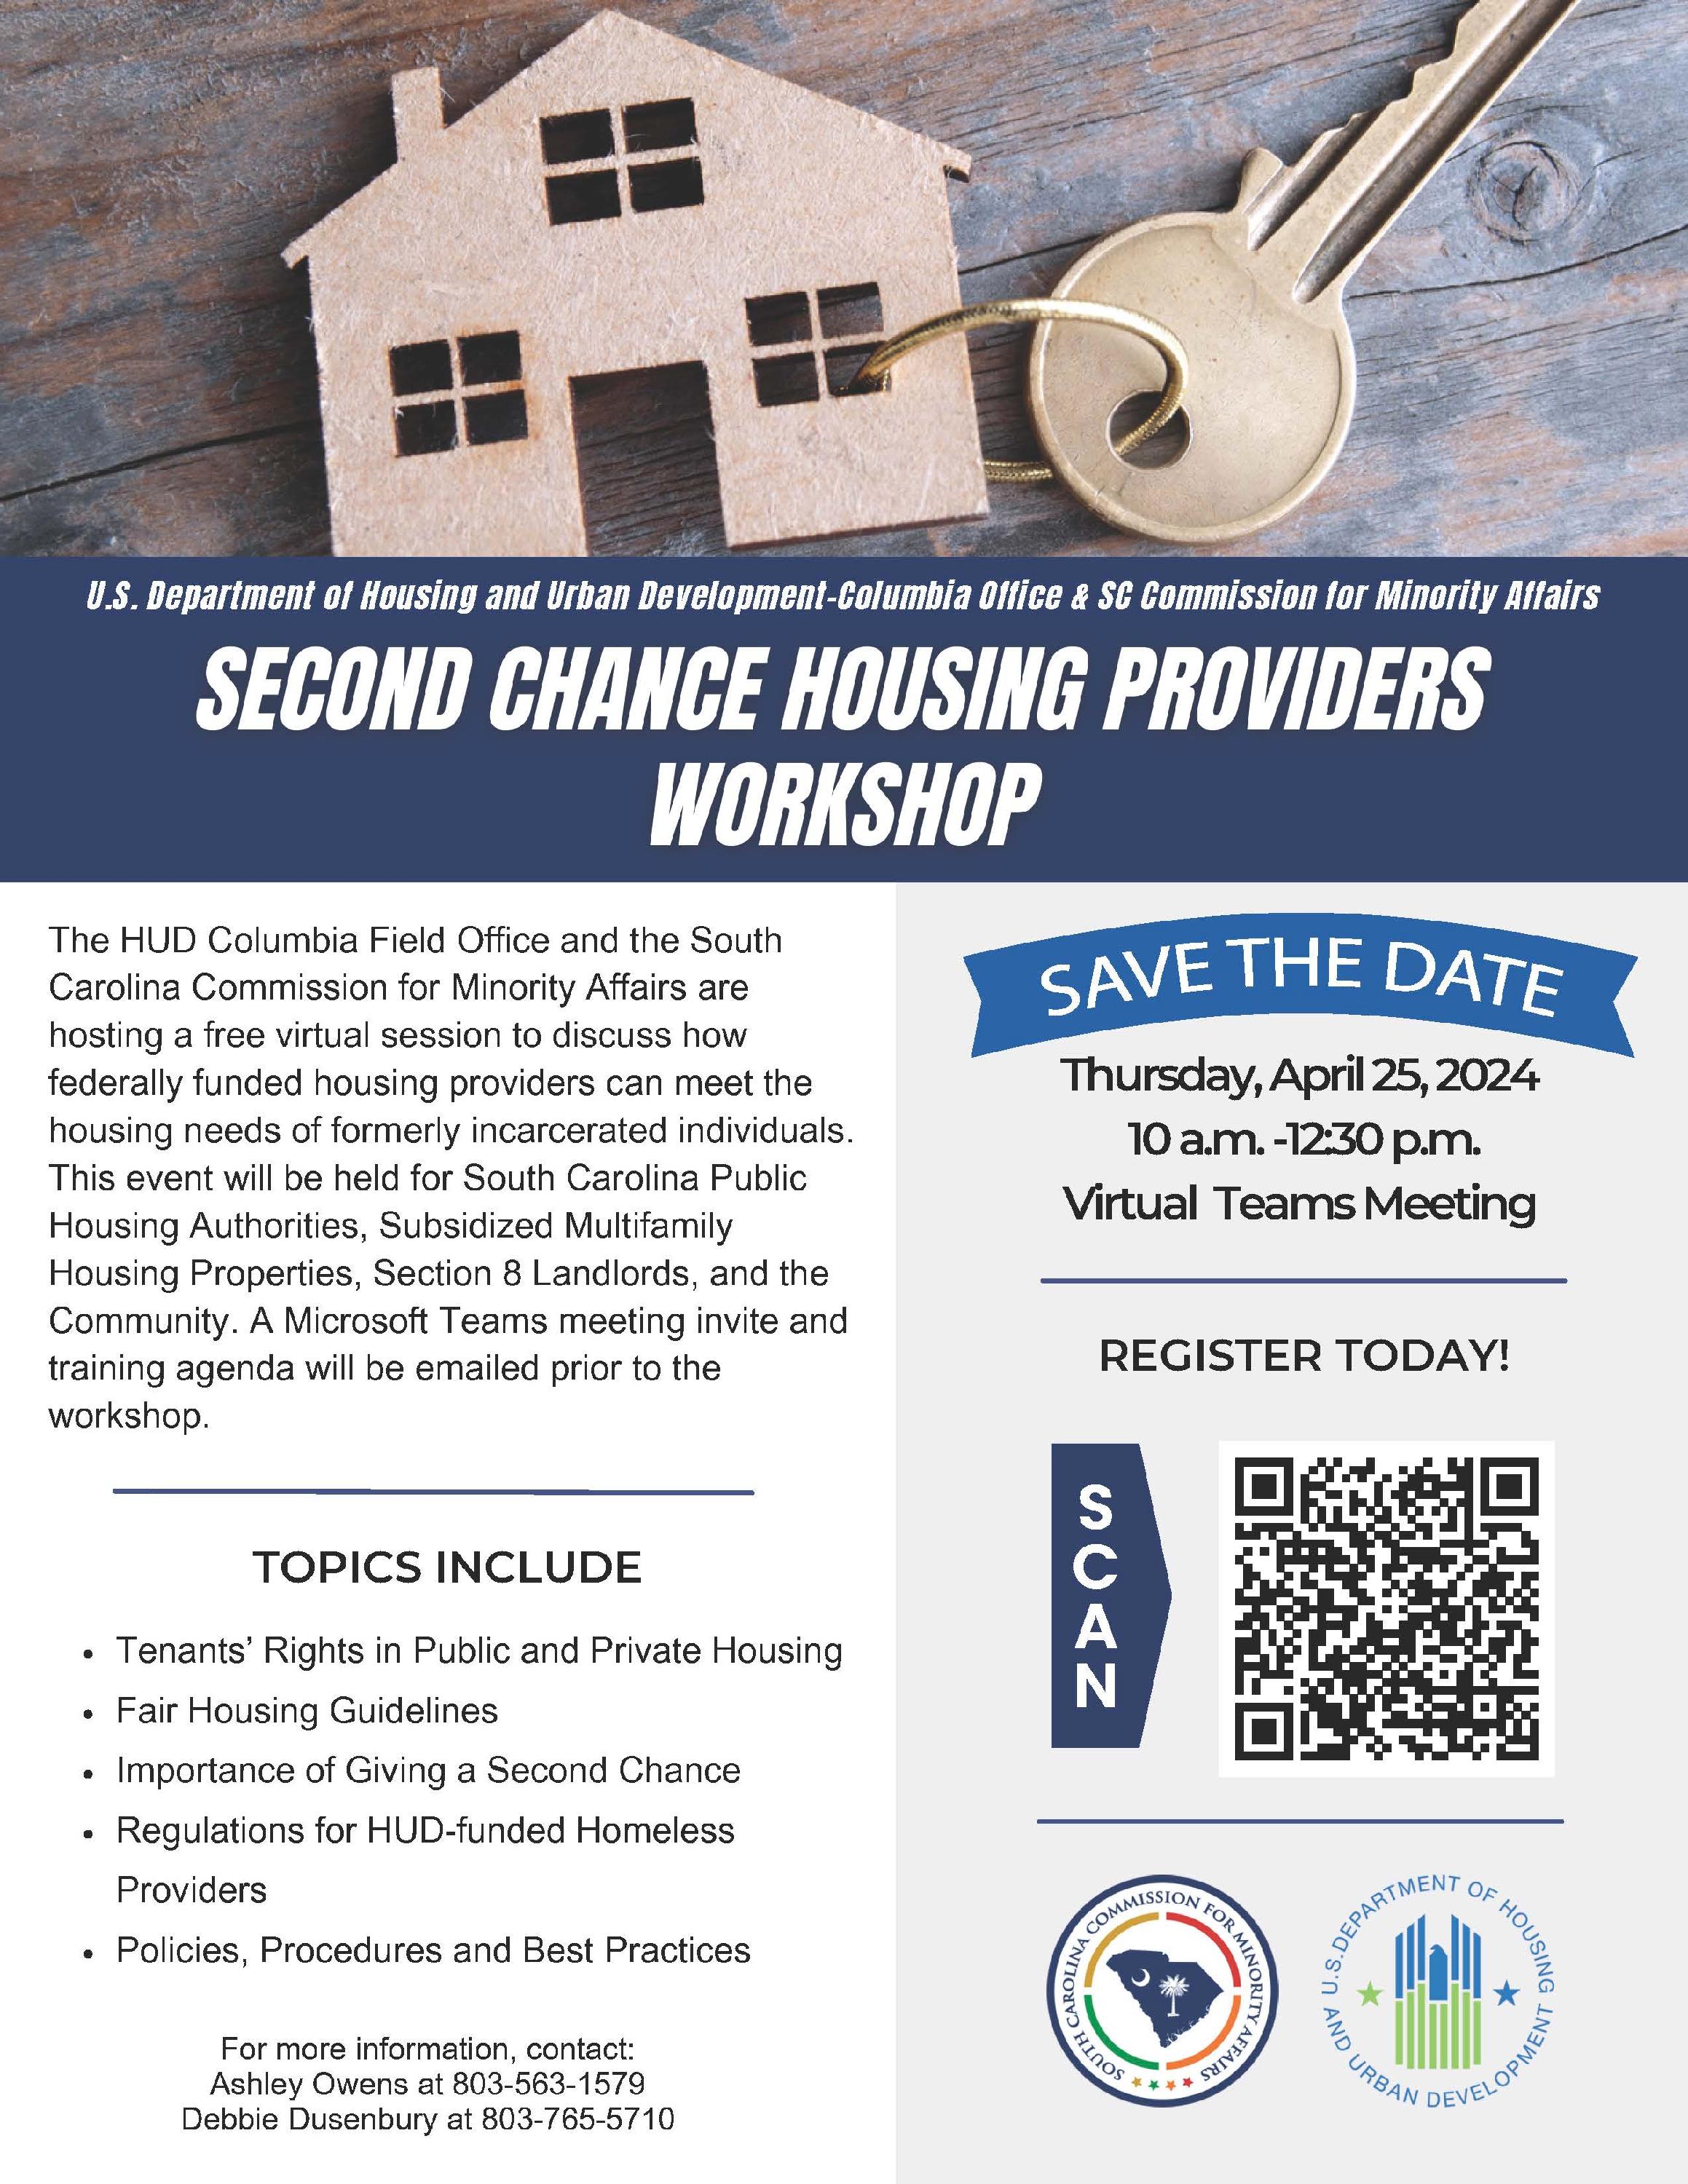 Second Chance Housing Providers Workshop Flyer